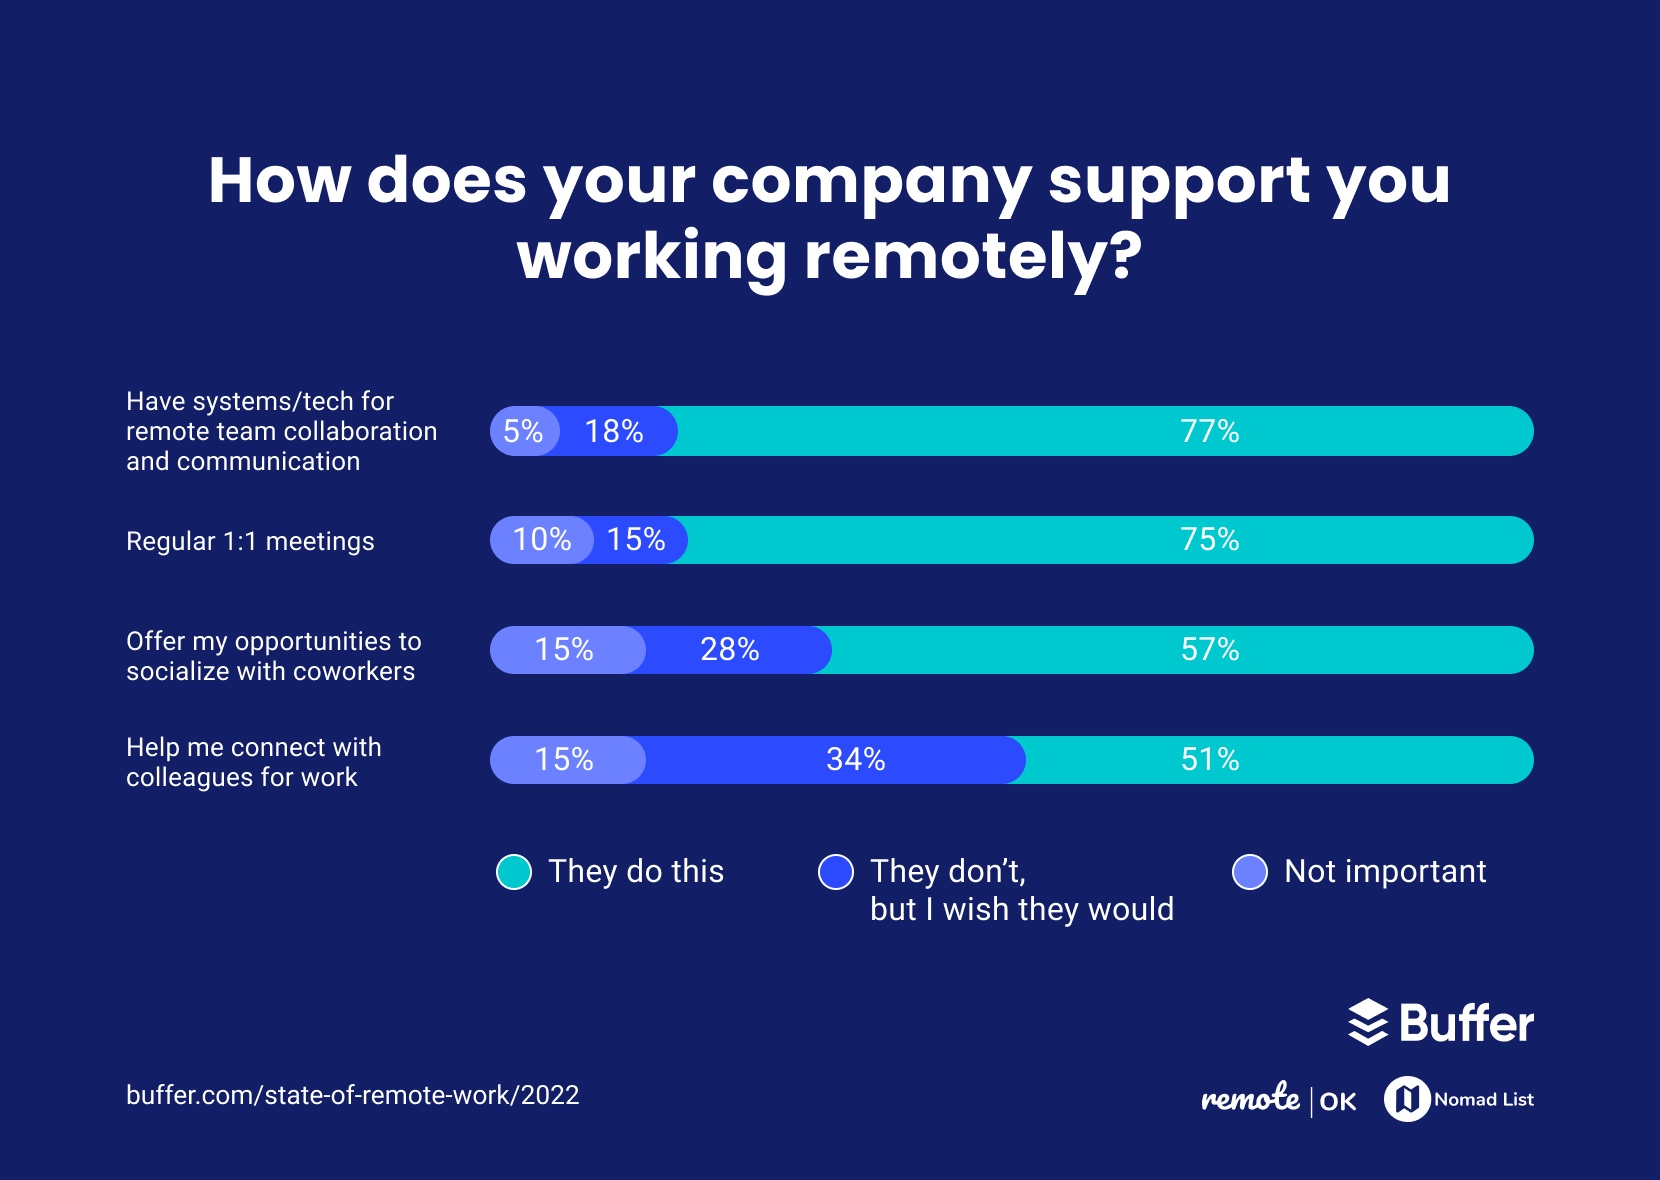 How does your company support you working remotely?